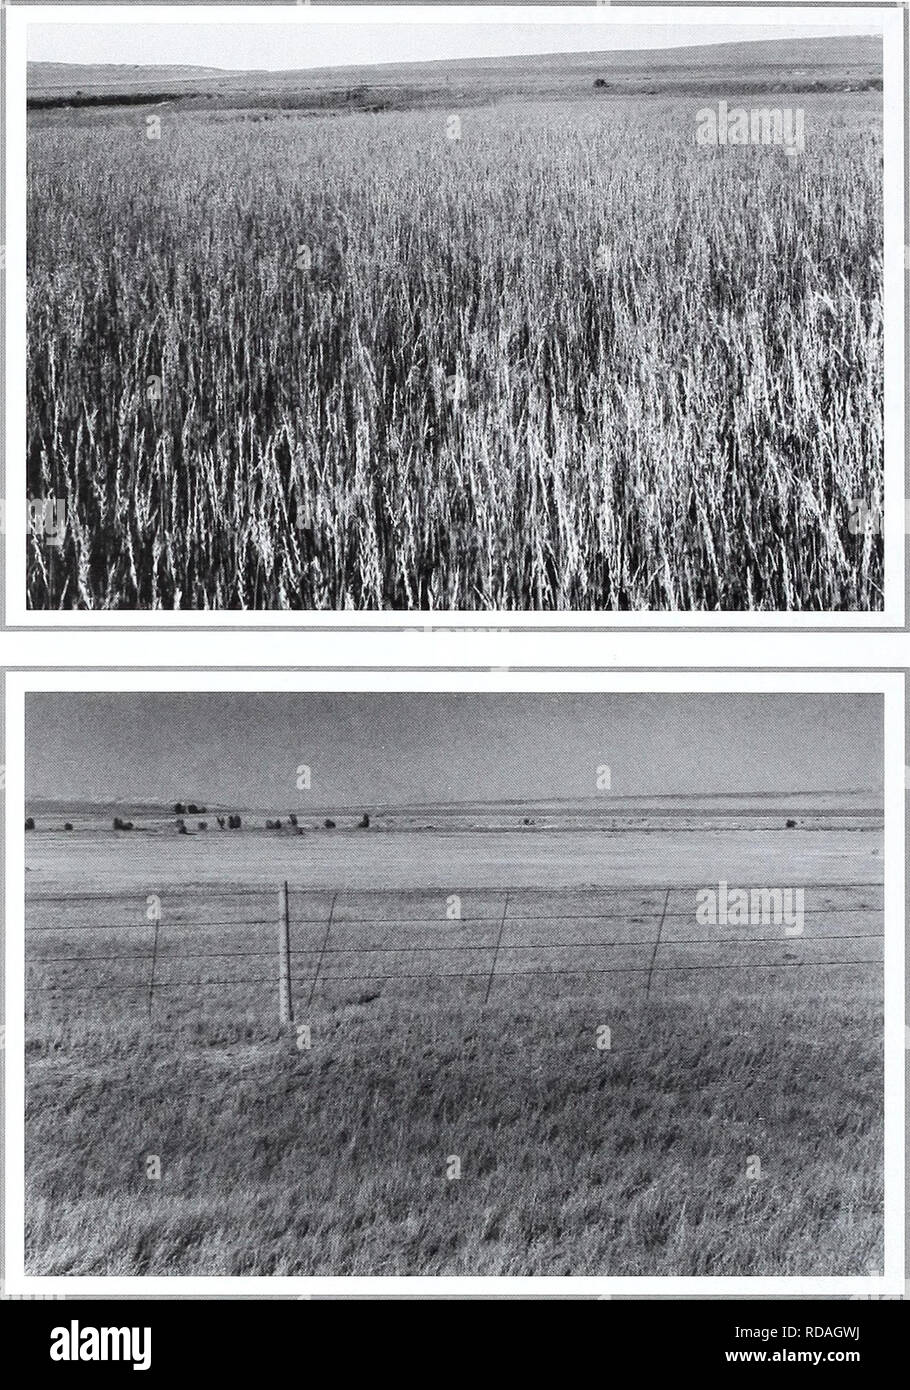 . Eighty years of vegetation and landscape changes in the Northern Great Plains : a photographic record. Range plants; Landscape; Botany; forbs; grasses; landscapes; botanical composition; shrubs; trees. Original Photograph July 6, 1927. Shantz V-3-1927. Facing east. First Retake and Description August 11, 1960. W.S.P., E-8-1960. Dr. Shantz' original picture shows an almost pure stand of Agropyron smithii. When the 1960 picture was taken there was very little of this grass, there being mainly Koeleria cristata (from Phillips 1963, p. 129). Second Retake August 3, 1998. Kay-4358-15.. Please not Stock Photo